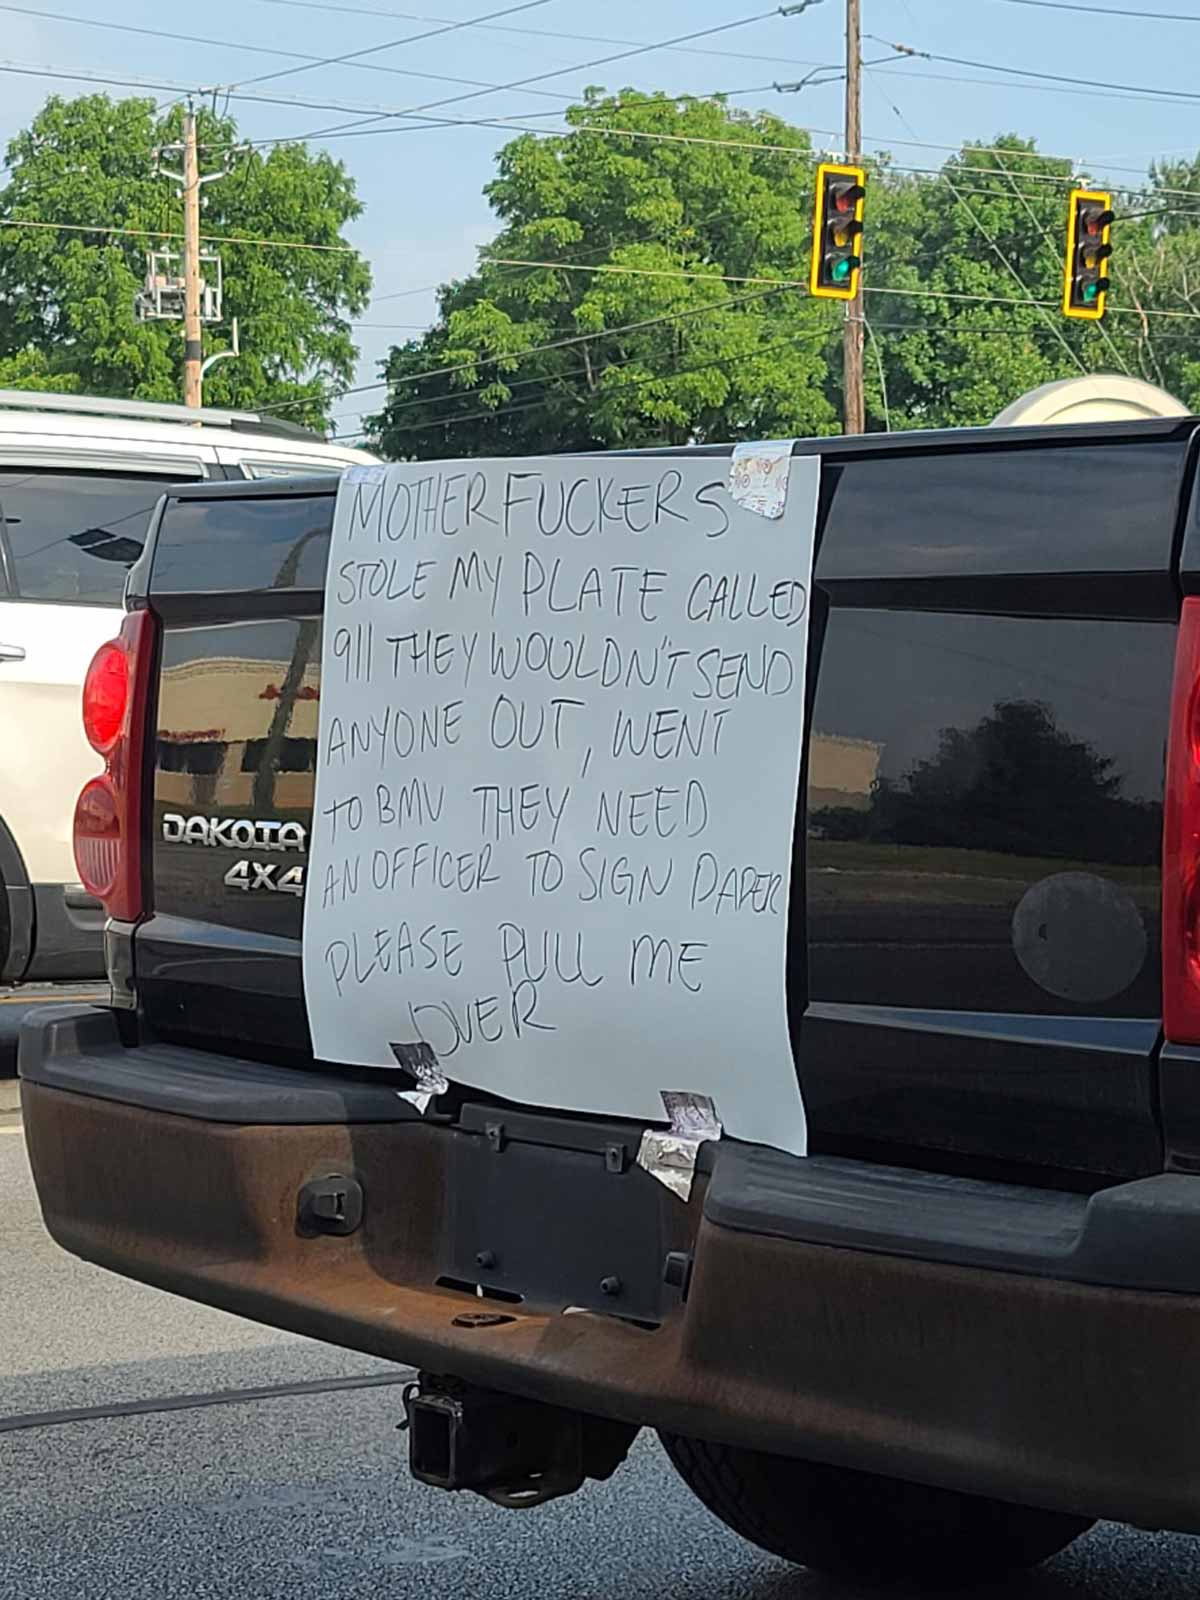 Funny handwritten sign on the back of a Dakota 4x4 that says 'motherfuckers stole my plate called 911 they wouldn't send anyone out, went to BMV they need an officer to sign paper please pull me over'